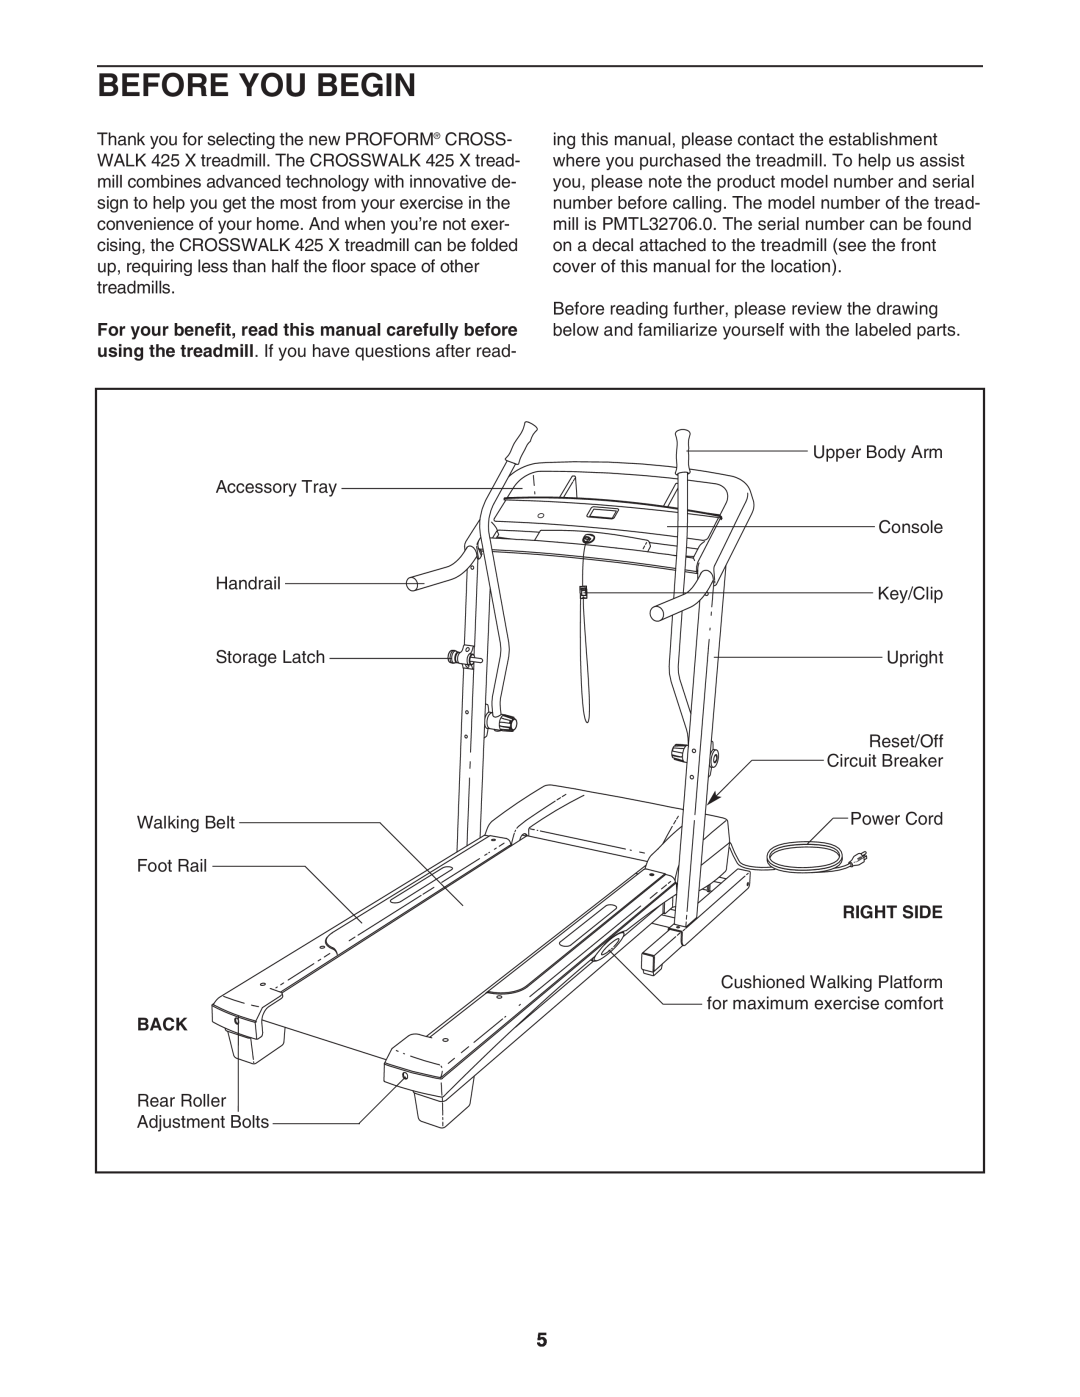 ProForm PMTL32706.0 user manual Before You Begin, Right Side, Back 